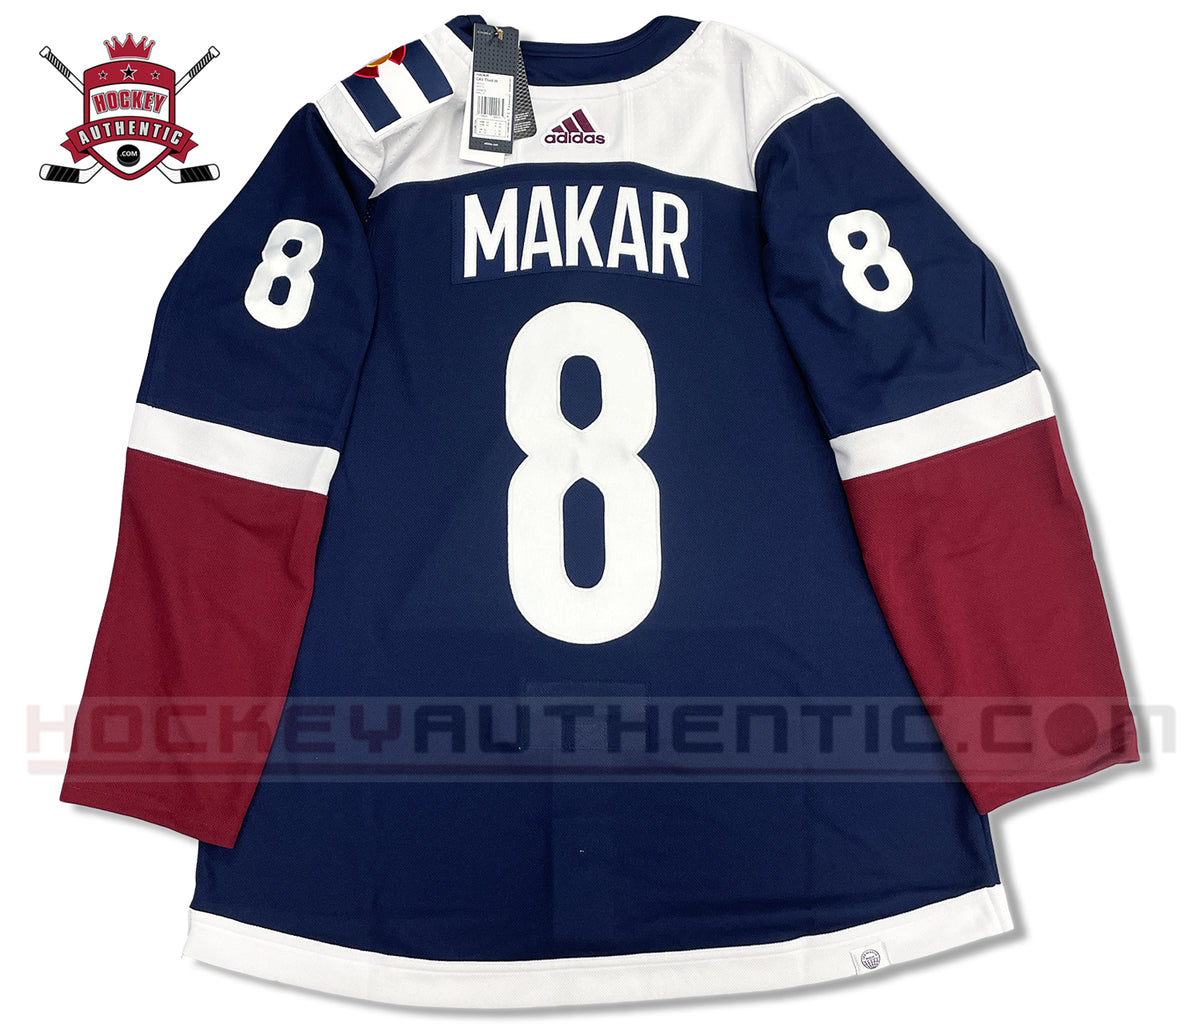 New Third Jersey Leaked by NHL Shop - Mile High Hockey